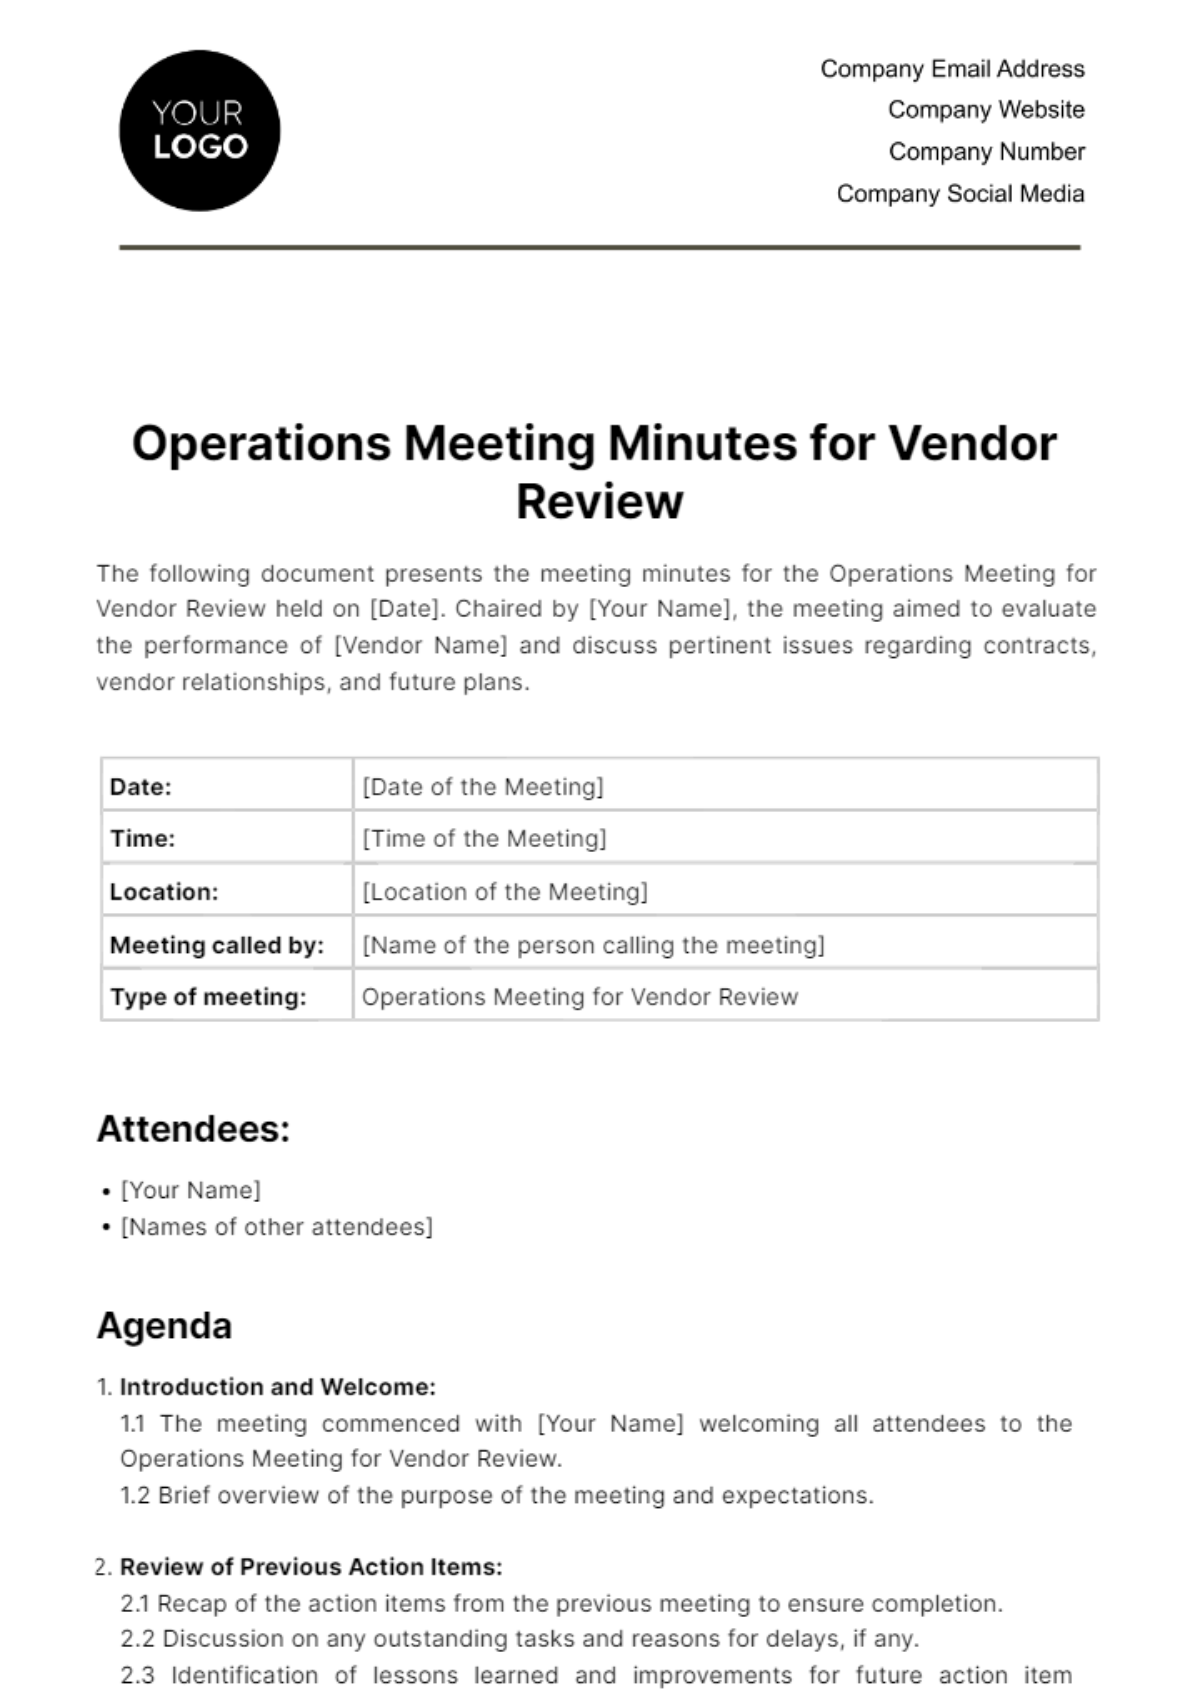 Free Operations Meeting Minute for Vendor Review Template